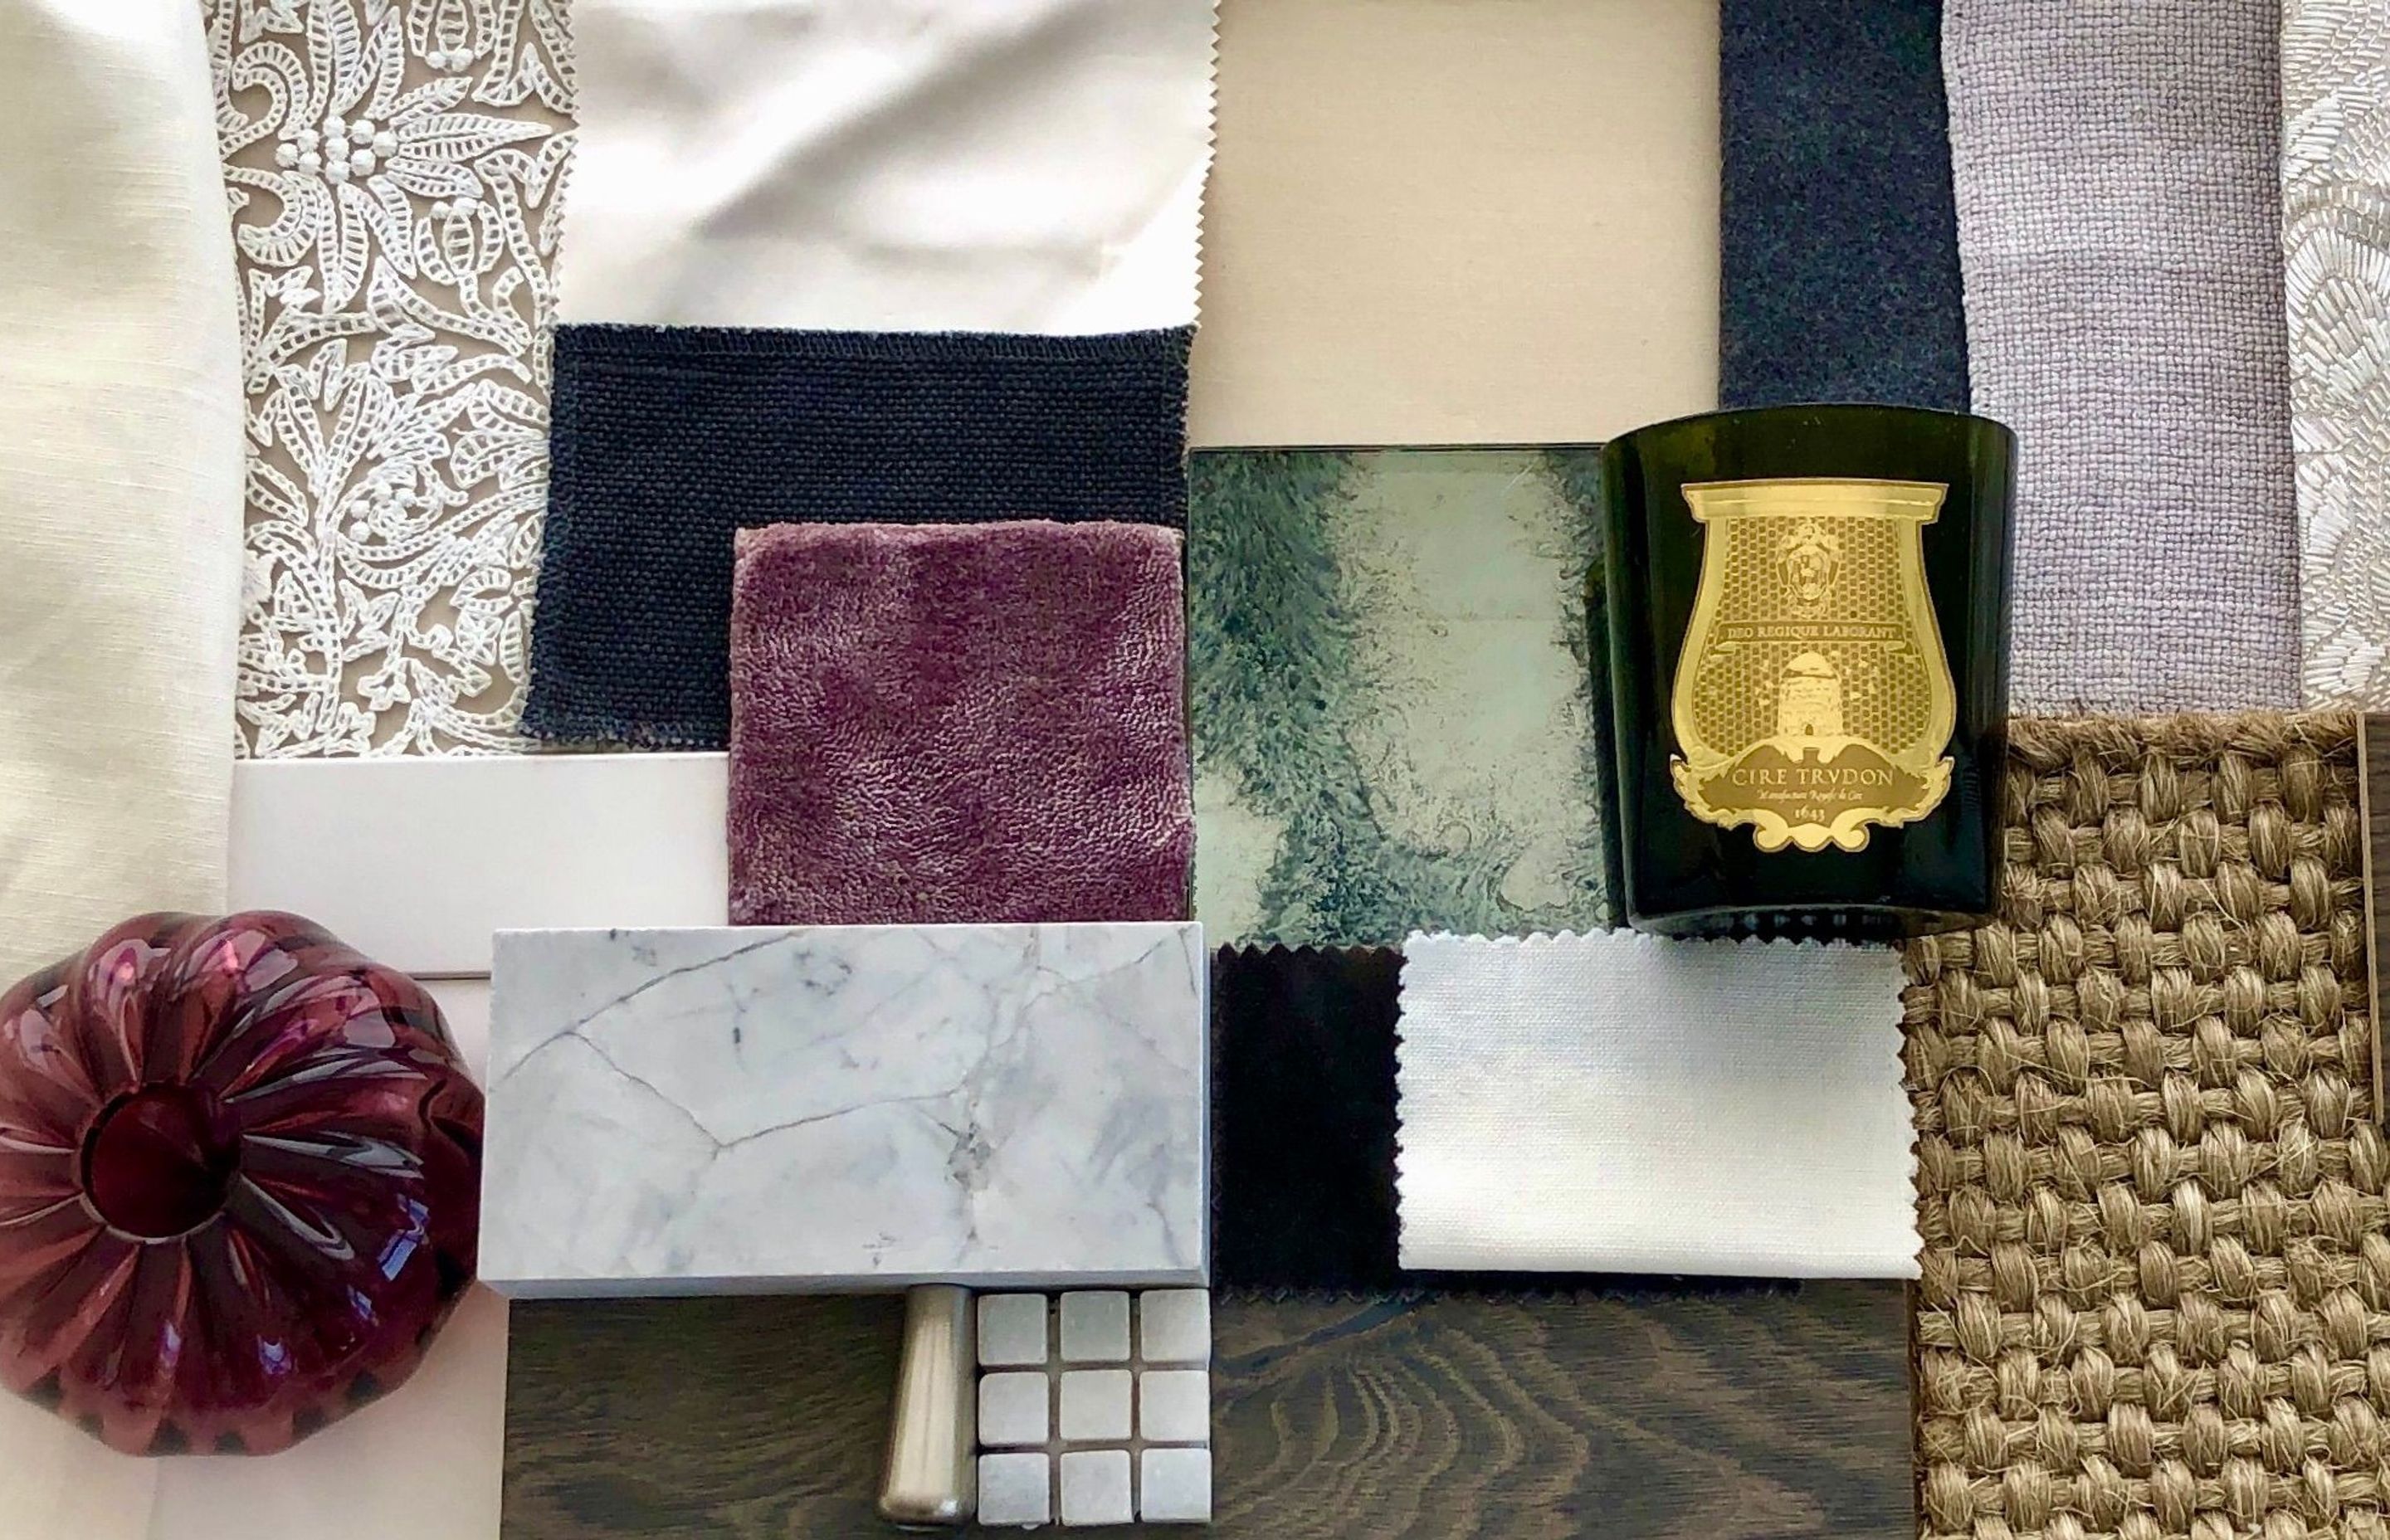 This materials board by Bridget Foley Design combines colour and texture in a sophisticated and timeless manner.